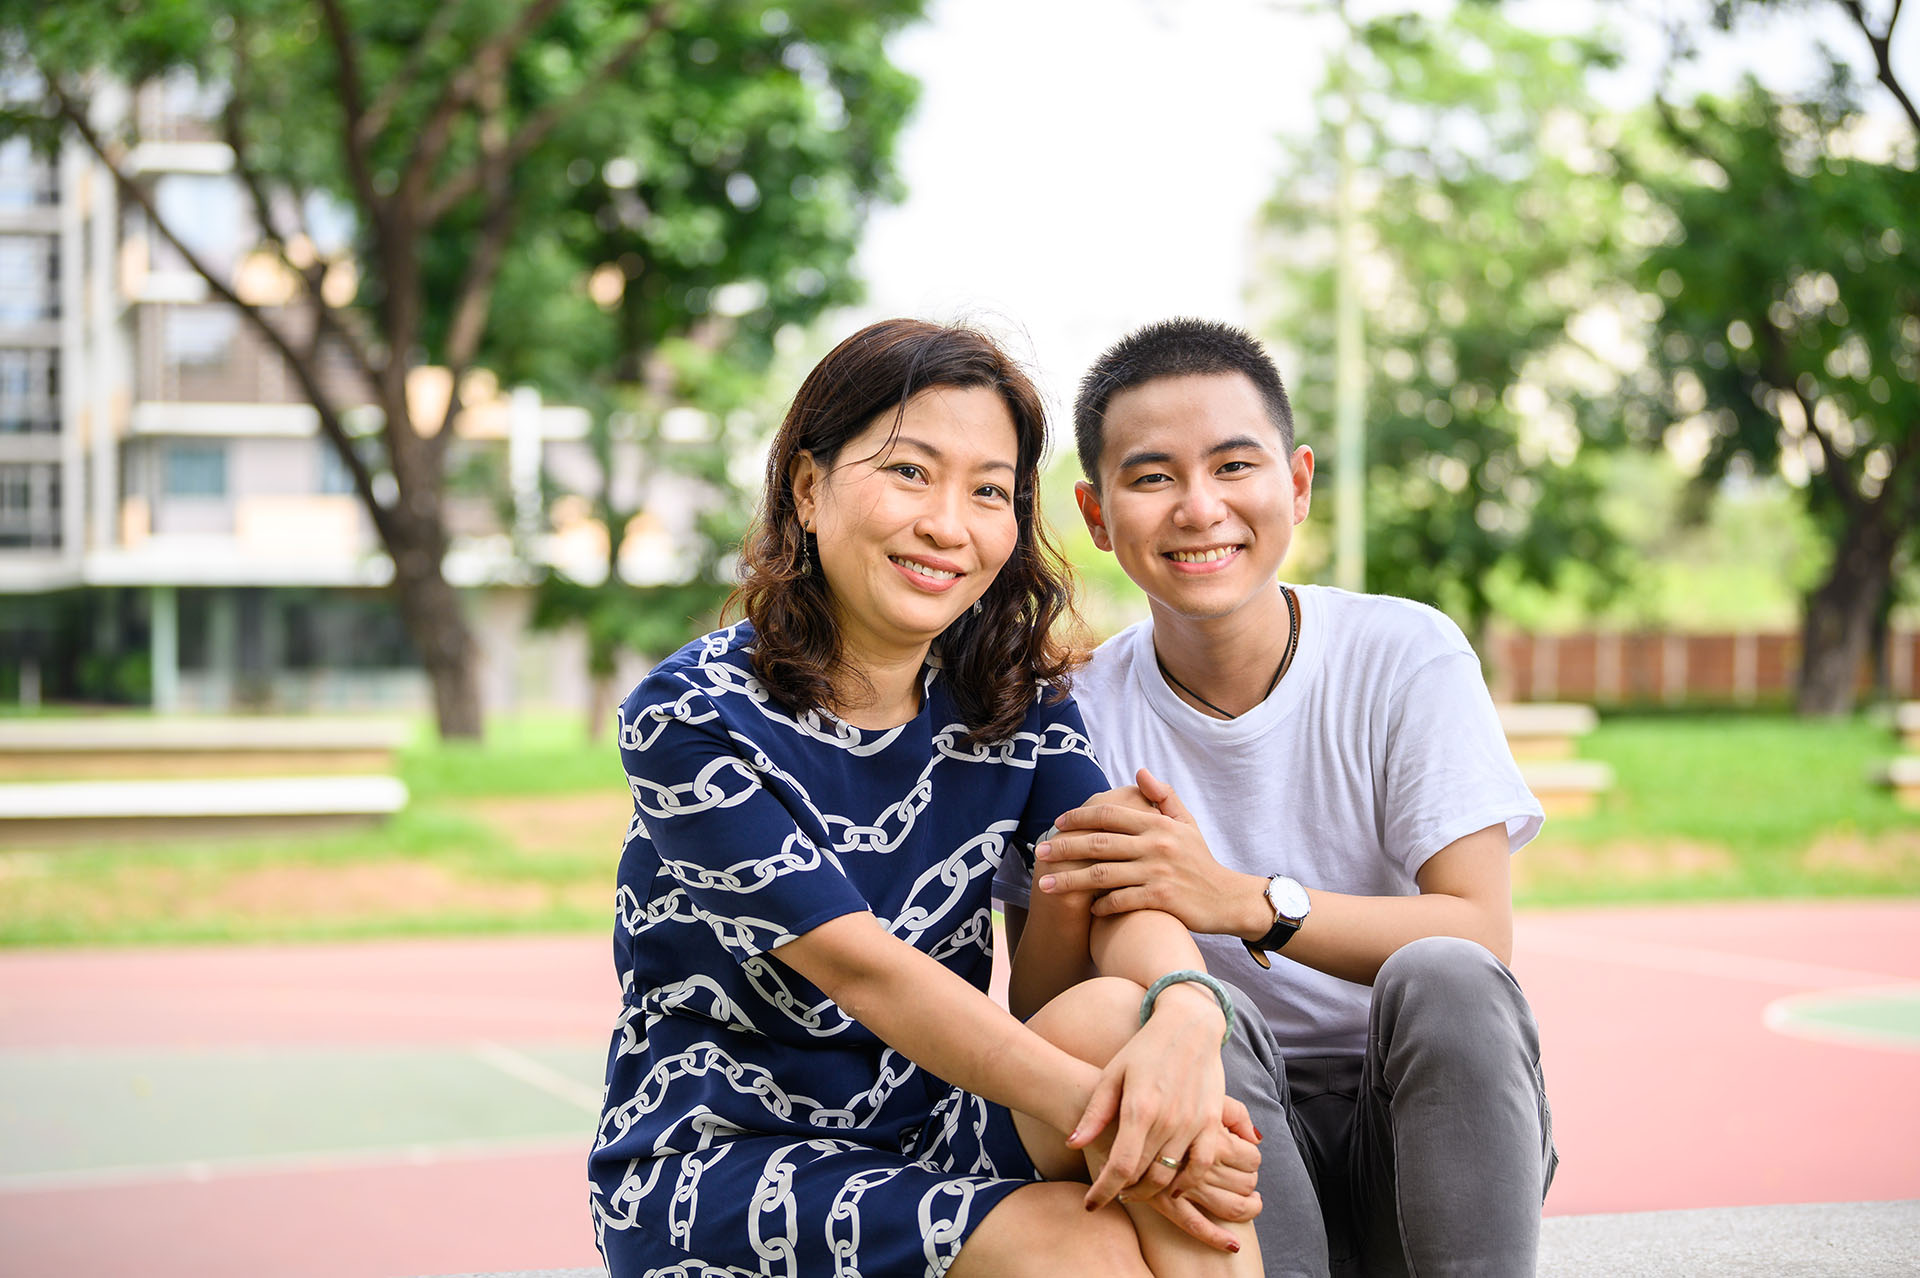 Vietnamese parent and child smiling